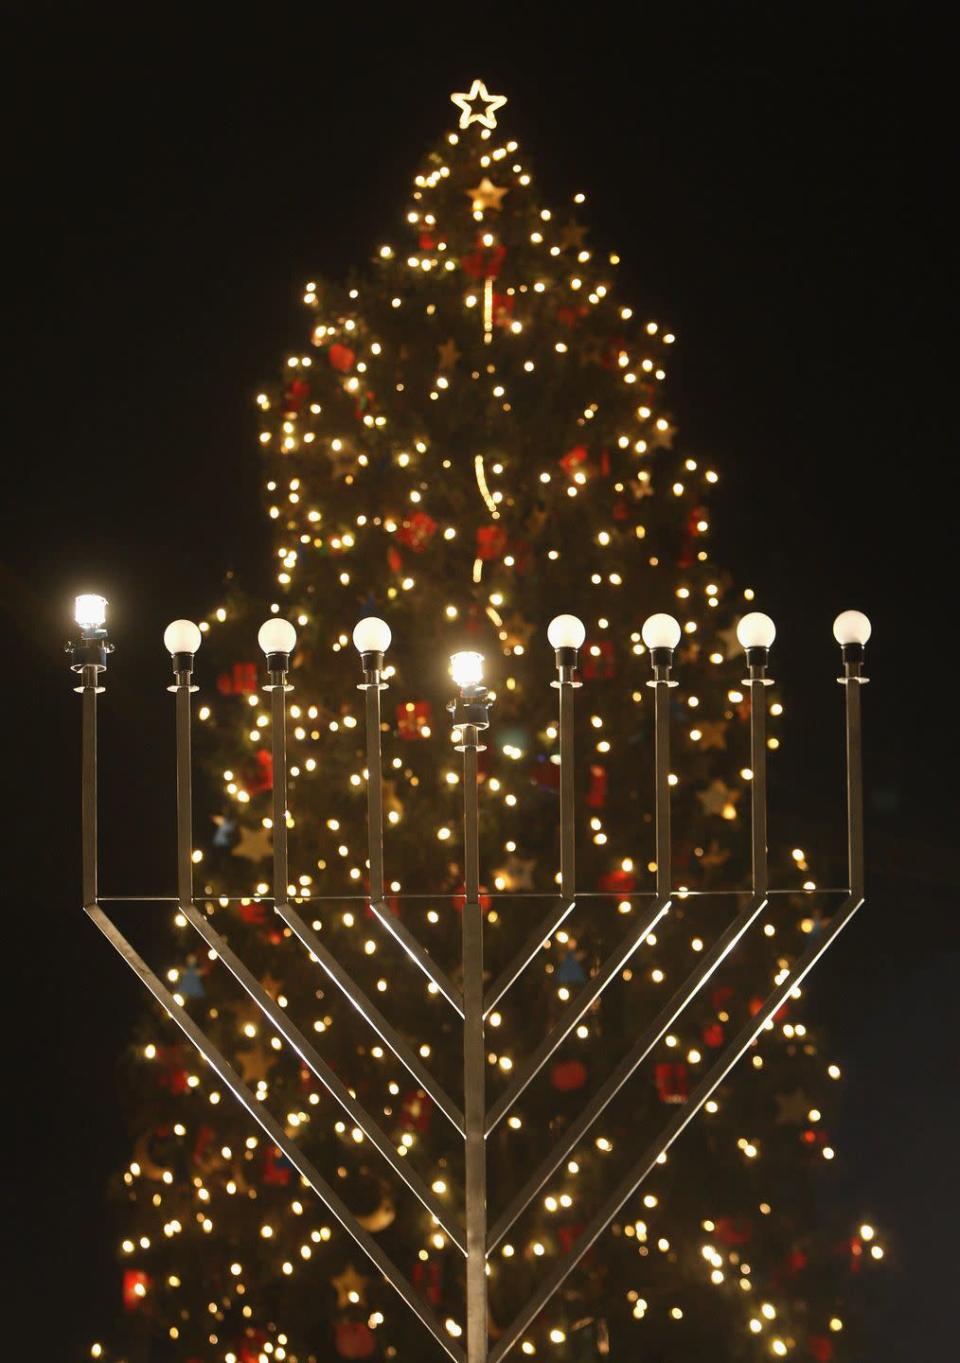 <p>Because the Hebrew calendar is lunisolar, Hanukkah isn't on <a href="https://www.chabad.org/holidays/chanukah/article_cdo/aid/671899/jewish/When-Is-Hanukkah-Chanukah-Celebrated-in-2018-2019-2020-and-2021.htm" rel="nofollow noopener" target="_blank" data-ylk="slk:the same date" class="link rapid-noclick-resp">the same date</a> every year. The celebration always begins on the 25th of Kislev, meaning it typically falls in November or December of the Gregorian calendar — the same season as <a href="https://www.goodhousekeeping.com/holidays/thanksgiving-ideas/g1918/thanksgiving-dinner-recipes/" rel="nofollow noopener" target="_blank" data-ylk="slk:Thanksgiving" class="link rapid-noclick-resp">Thanksgiving</a> and Christmas.</p>